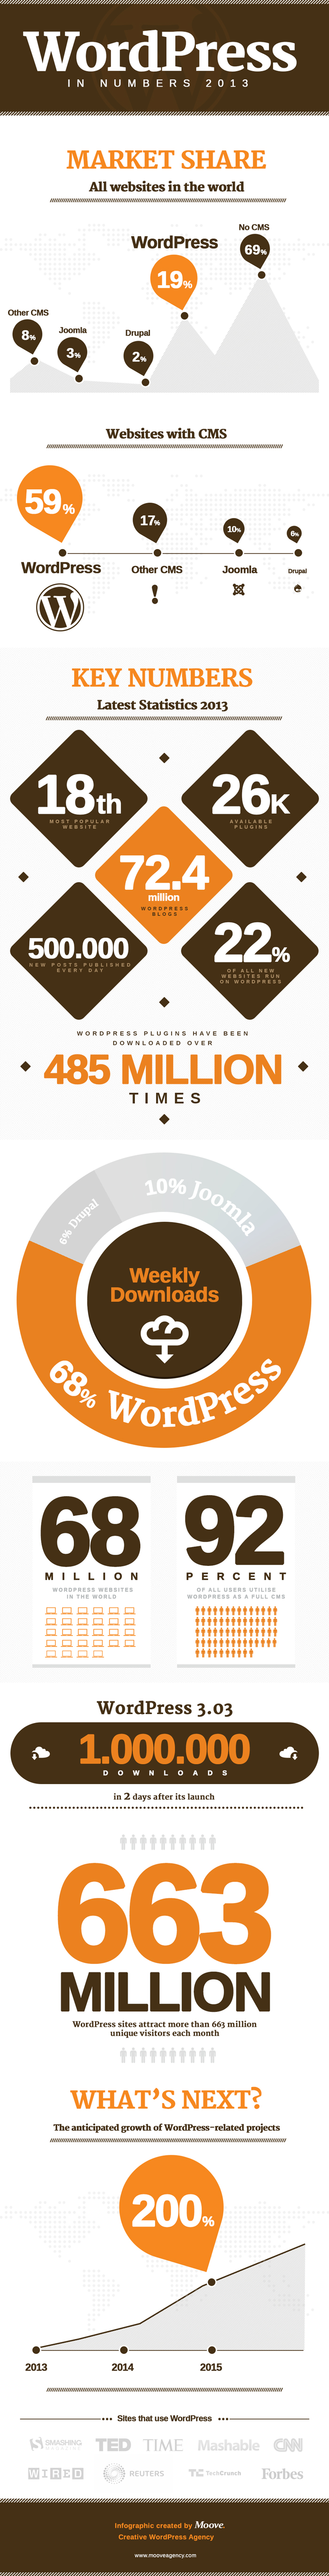 WordPress in Numbers Infographic 2013